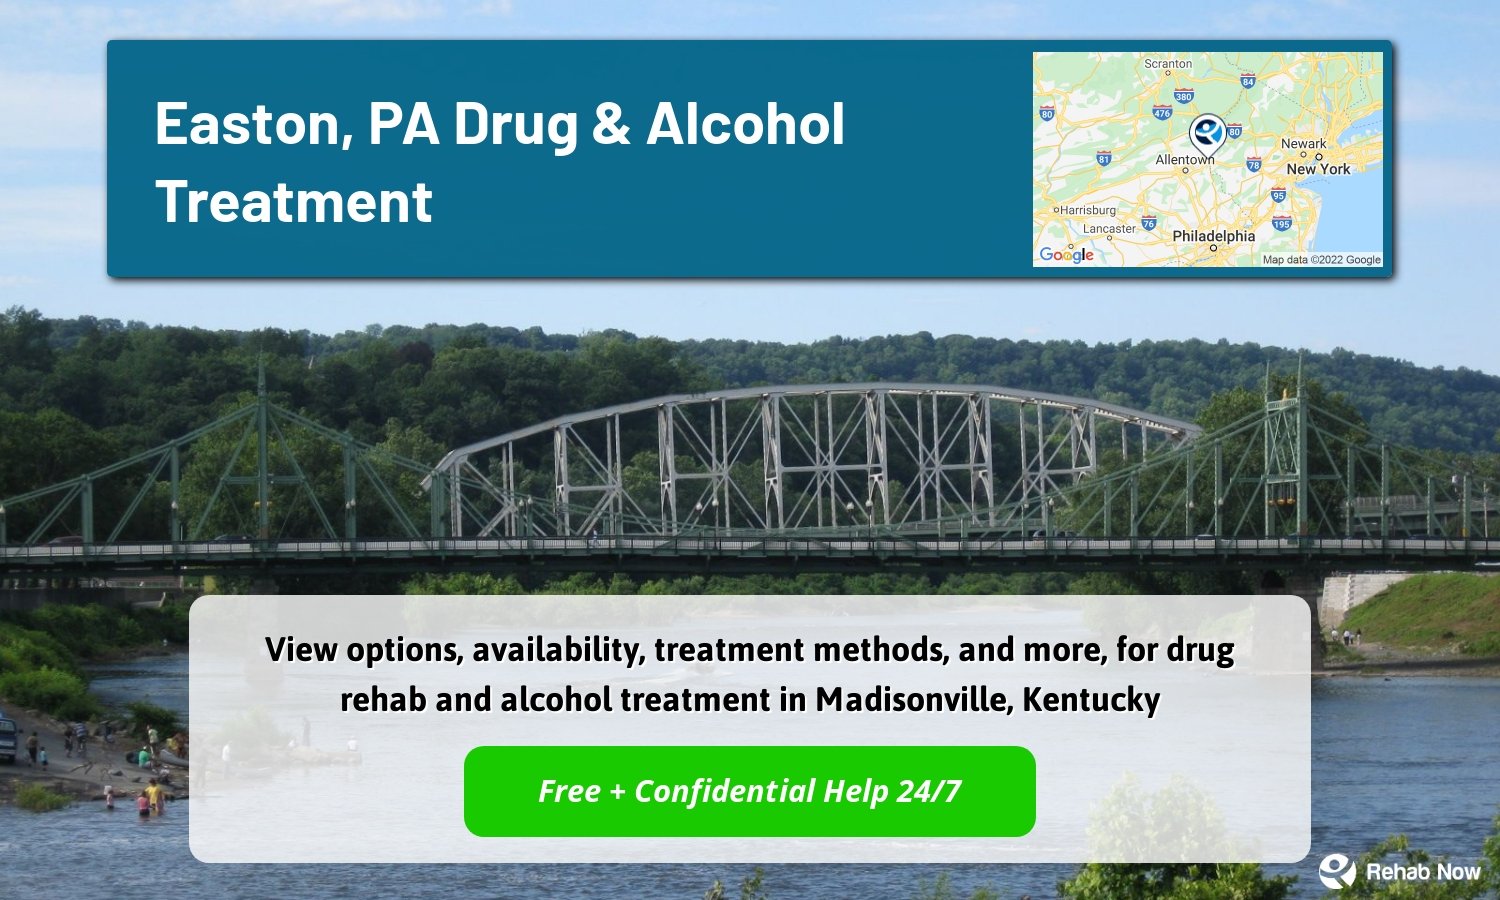 View options, availability, treatment methods, and more, for drug rehab and alcohol treatment in Madisonville, Kentucky